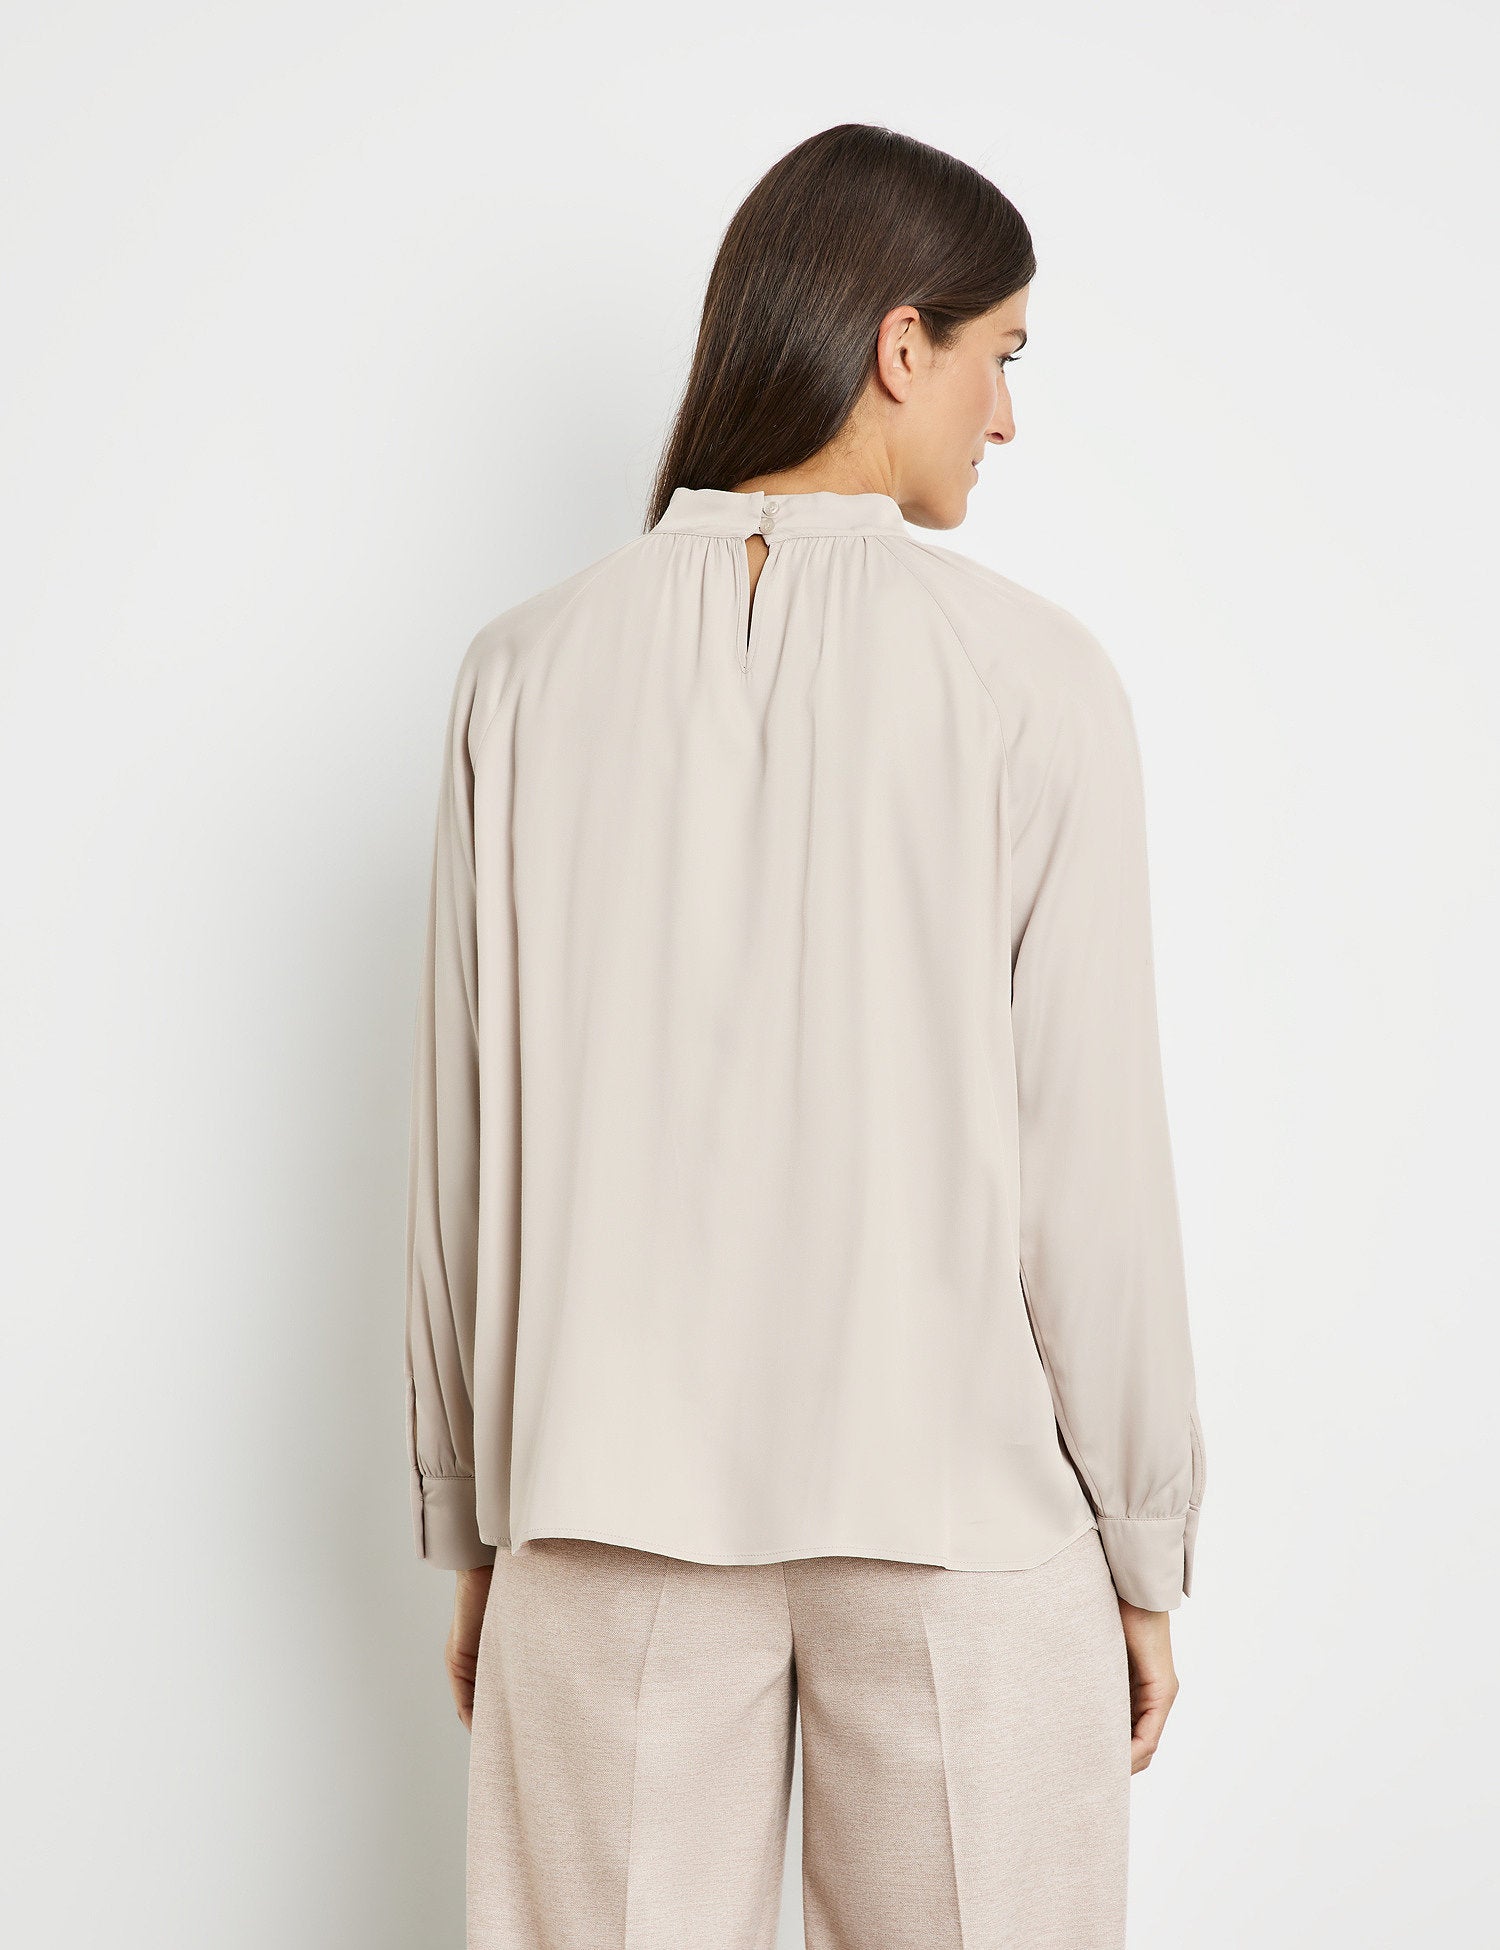 Blouse With A Stand-Up Collar_260016-31410_90544_06